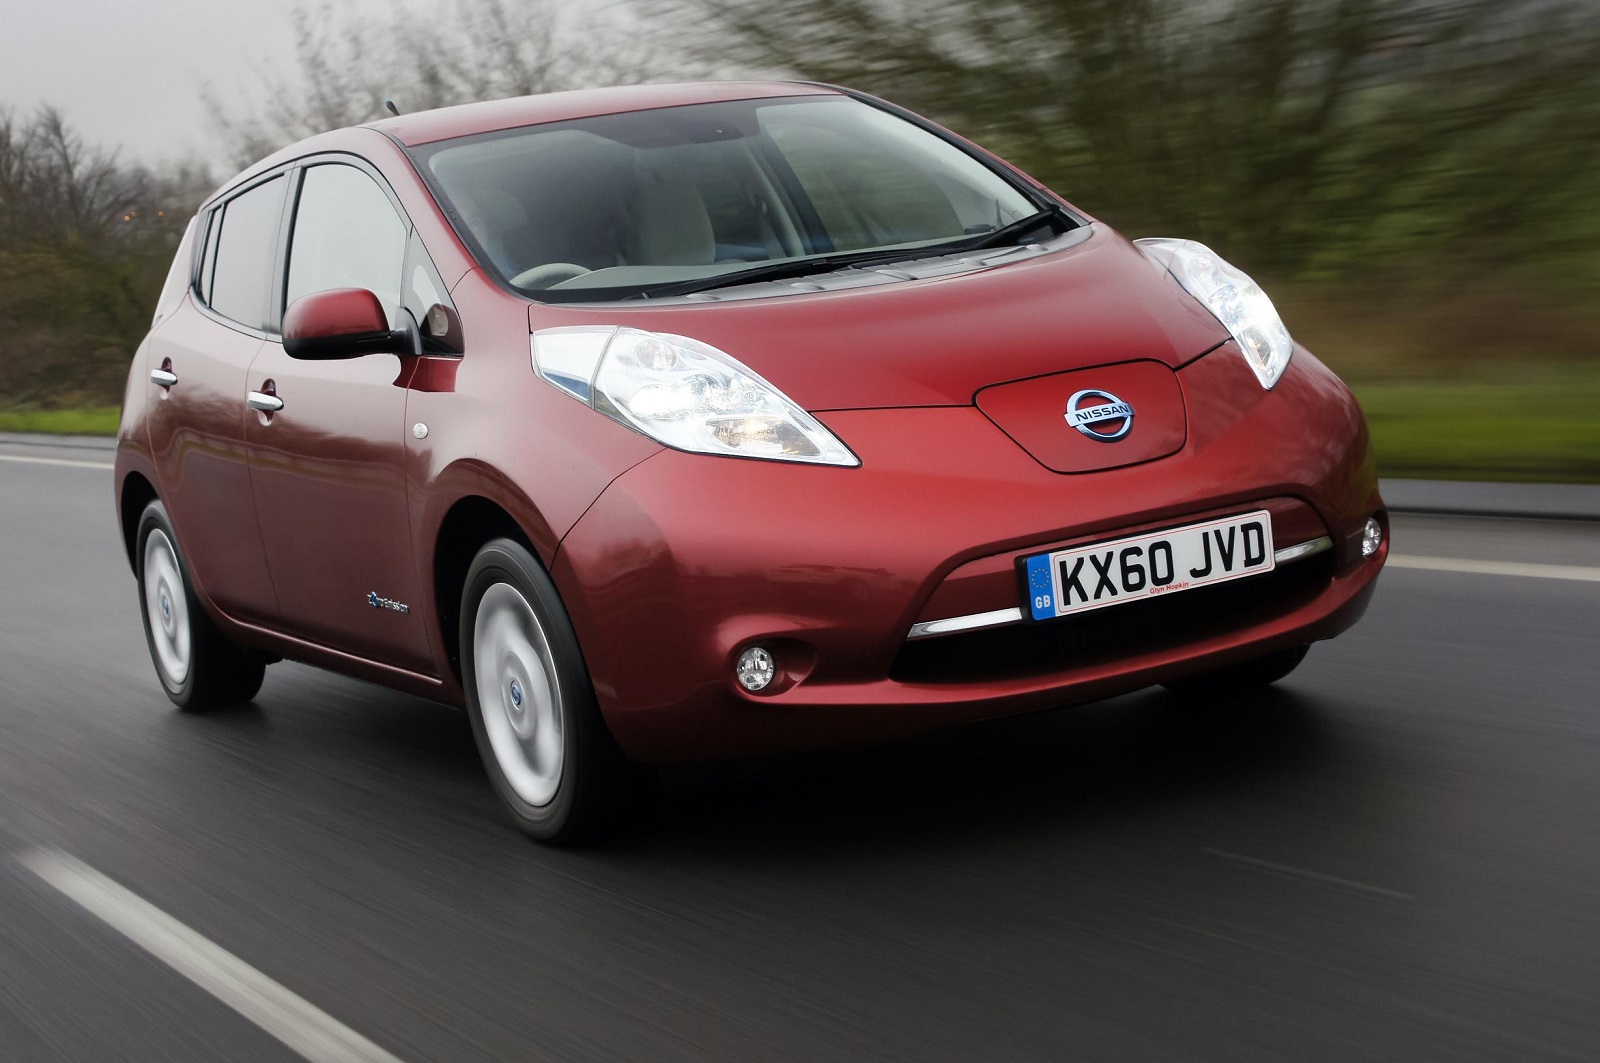 Top 5 used electric cars under £10,000